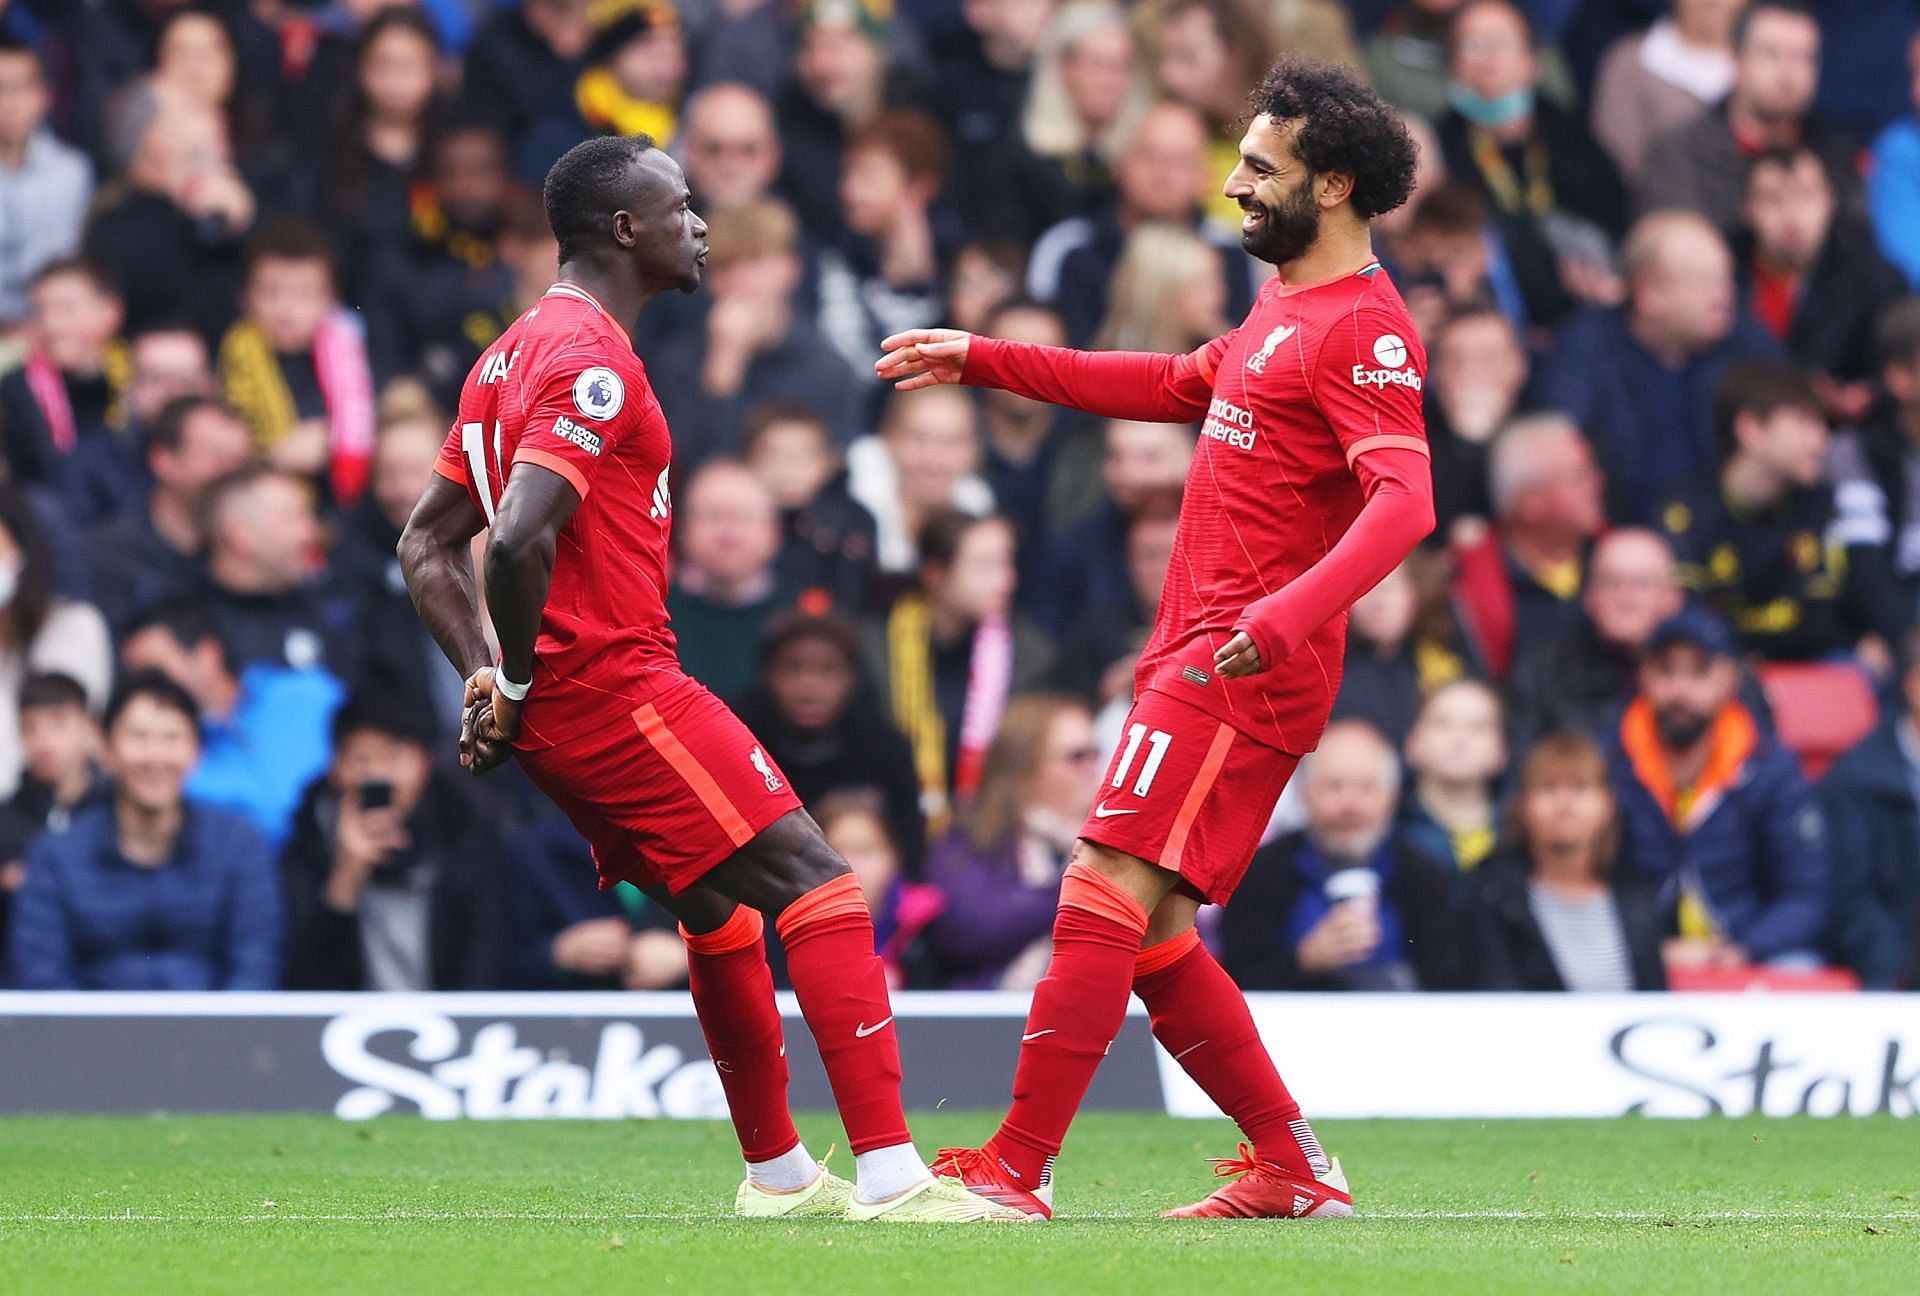 The return of superstar duo Mohamed Salah and Sadio Mane will be a shot in the arm for the Reds